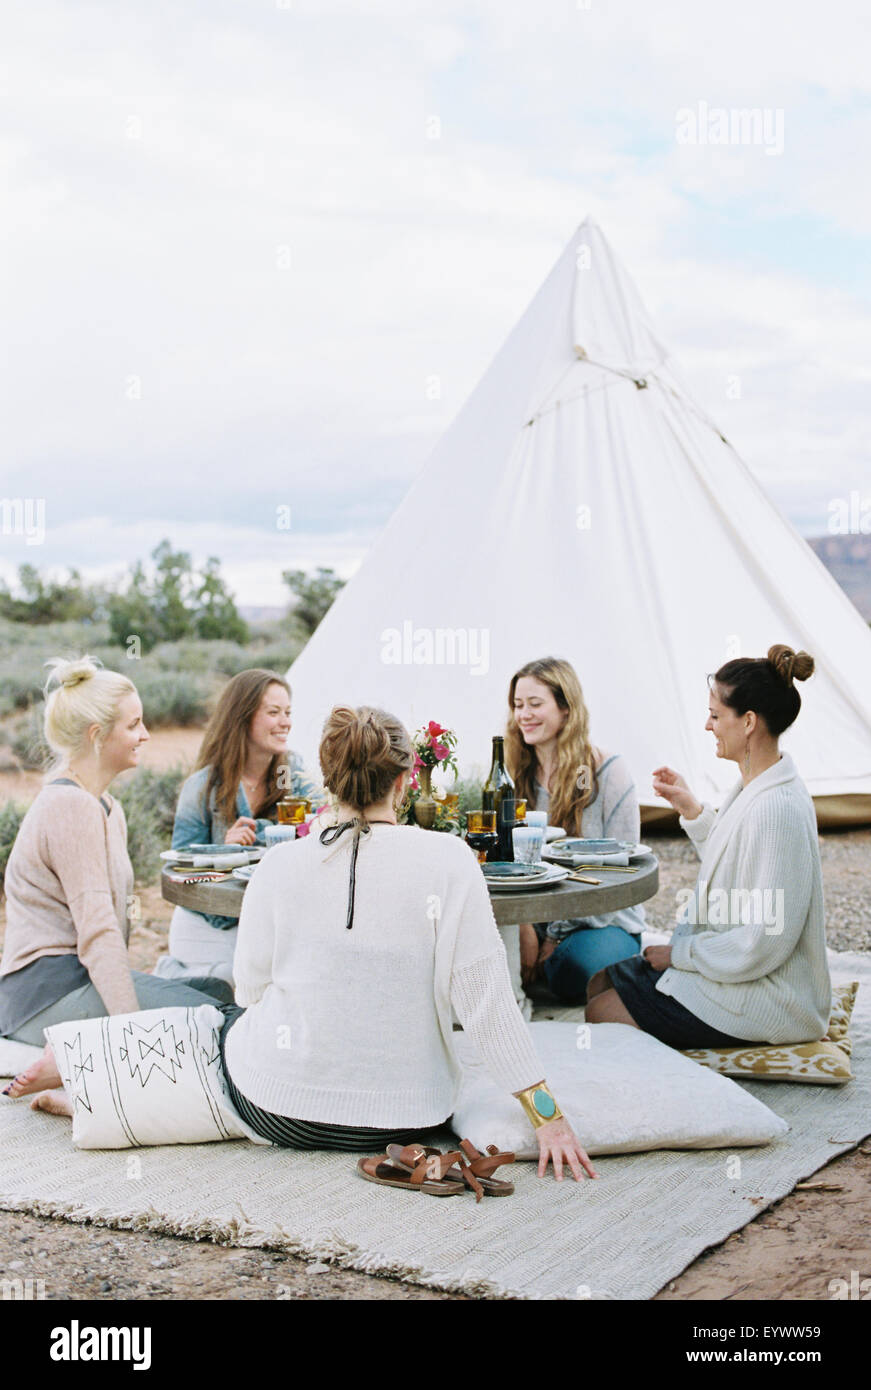 Group of women enjoying an outdoor meal by a teepee in the desert. Stock Photo